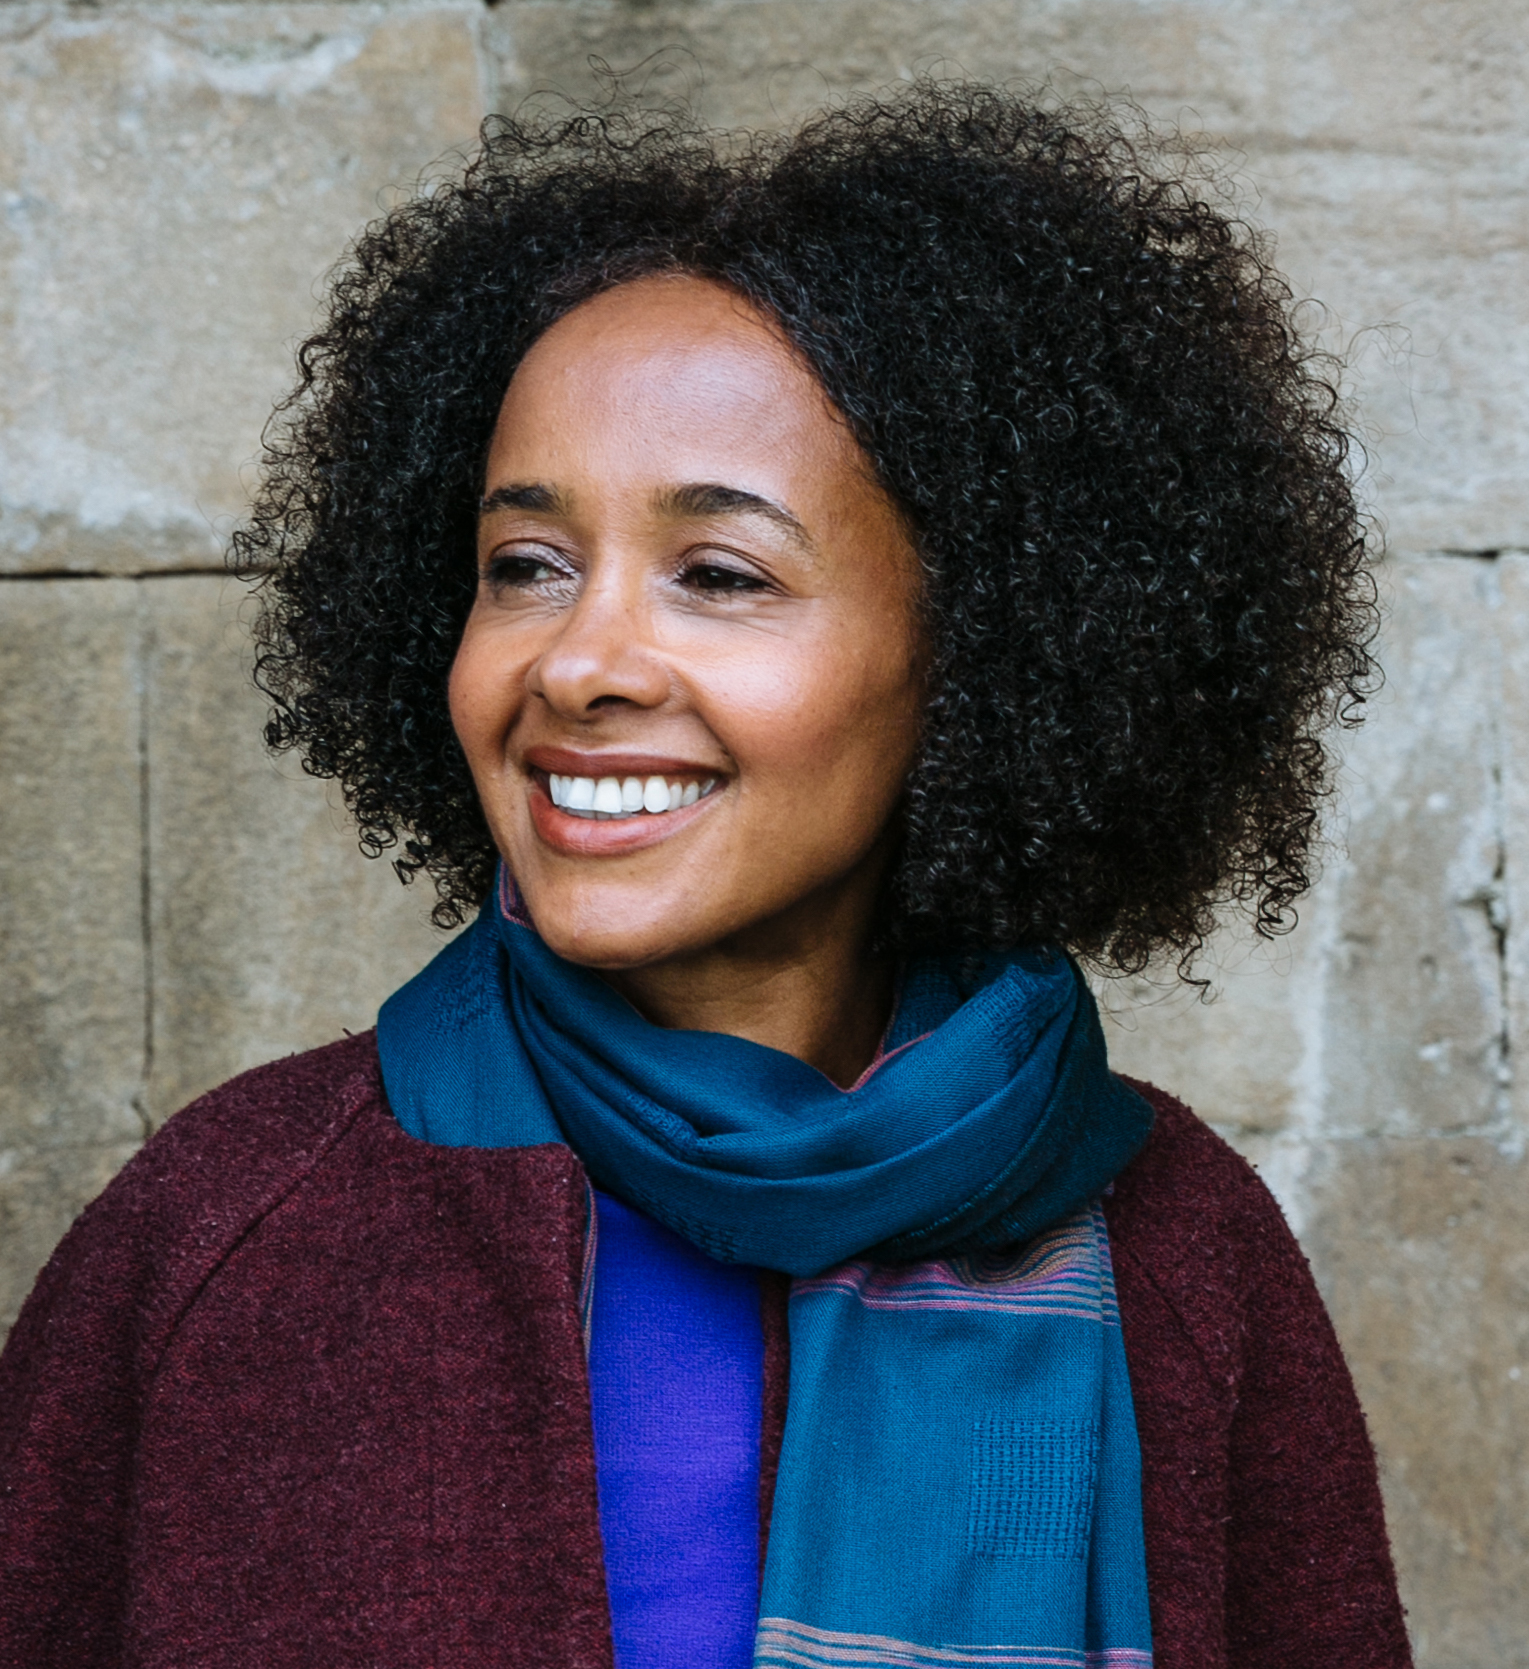 A portrait of Black novelist and journalist Diana Evans. She has shoulder length hair and is wearing a maroon jacket, blue shirt and blue scarf.